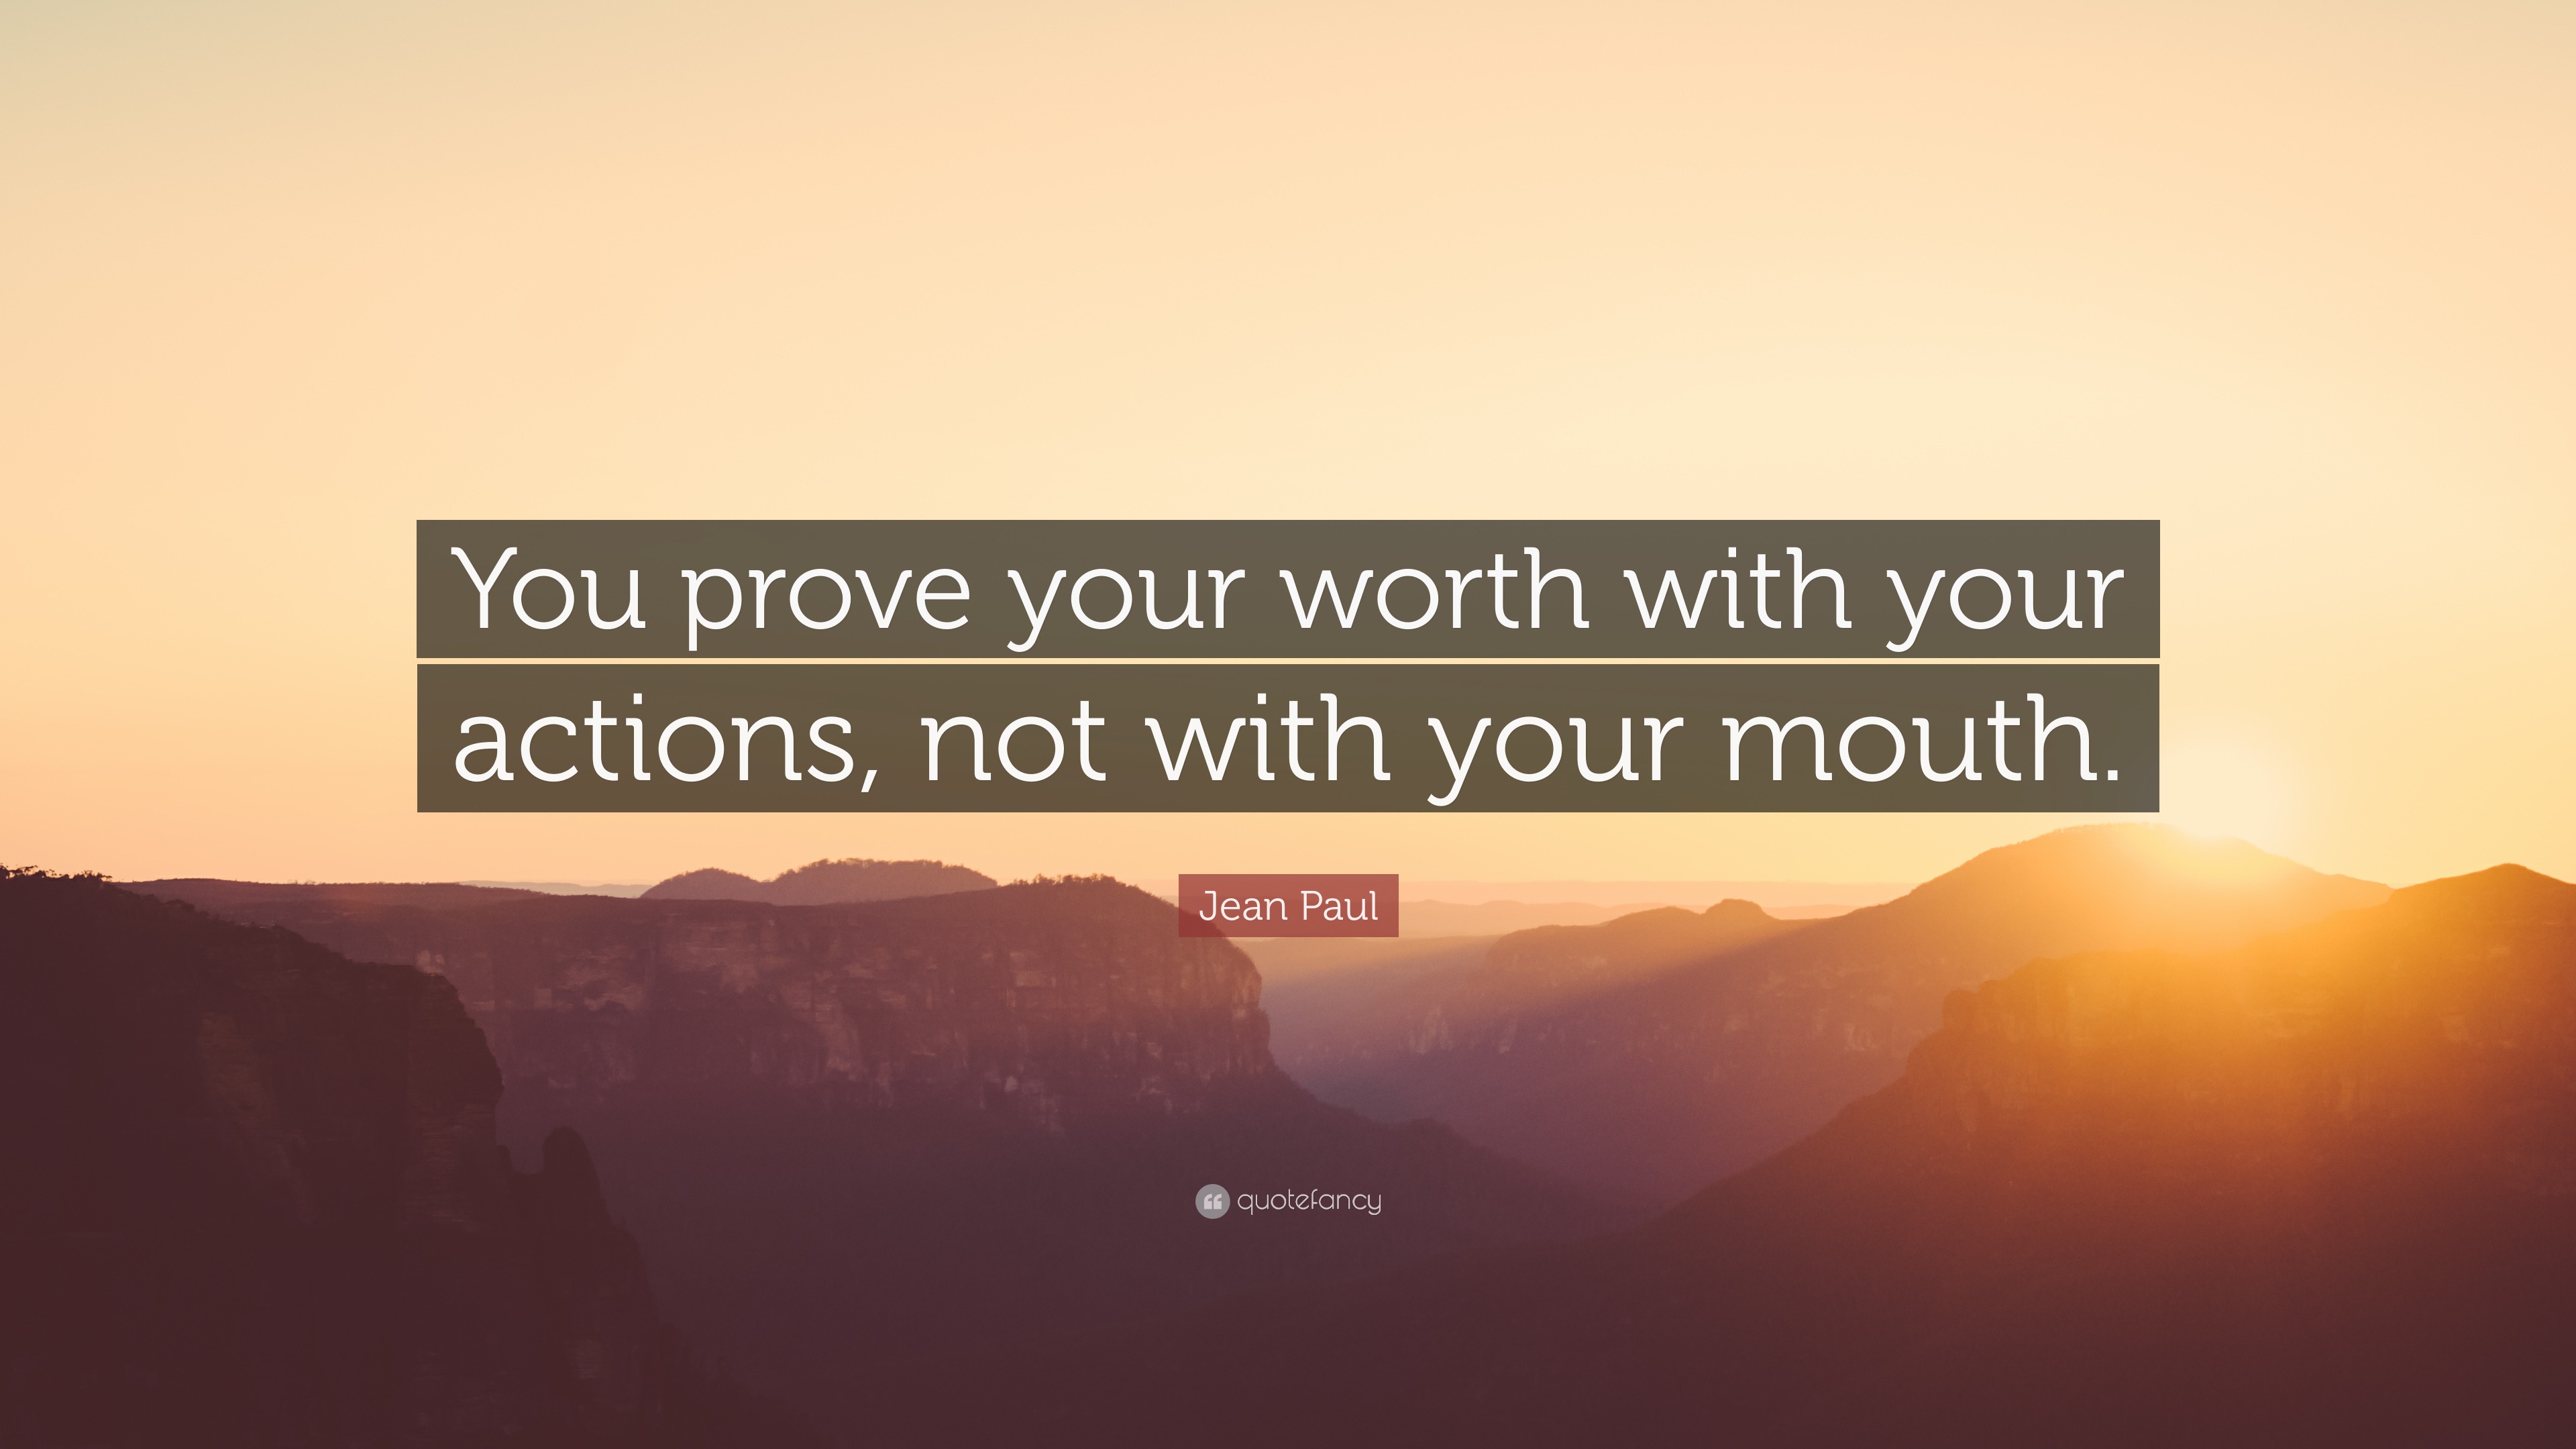 Jean Paul Quote “You prove your worth with your actions